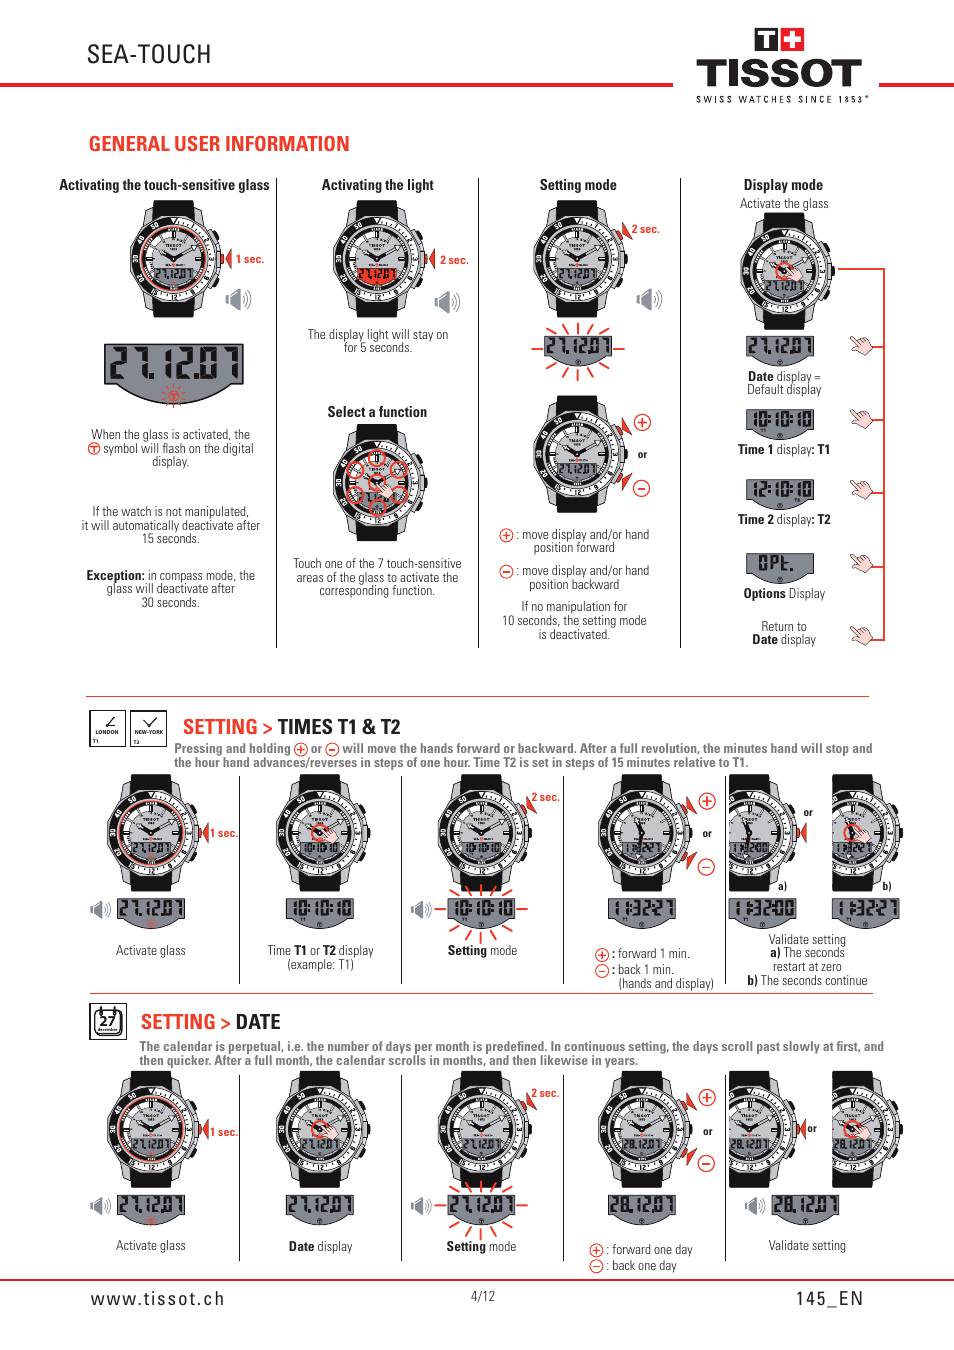 Sea-touch, General user information, Setting > times t1 & t2 setting > date  | Tissot SEA-TOUCH 145 User Manual | Page 4 / 12 | Original mode